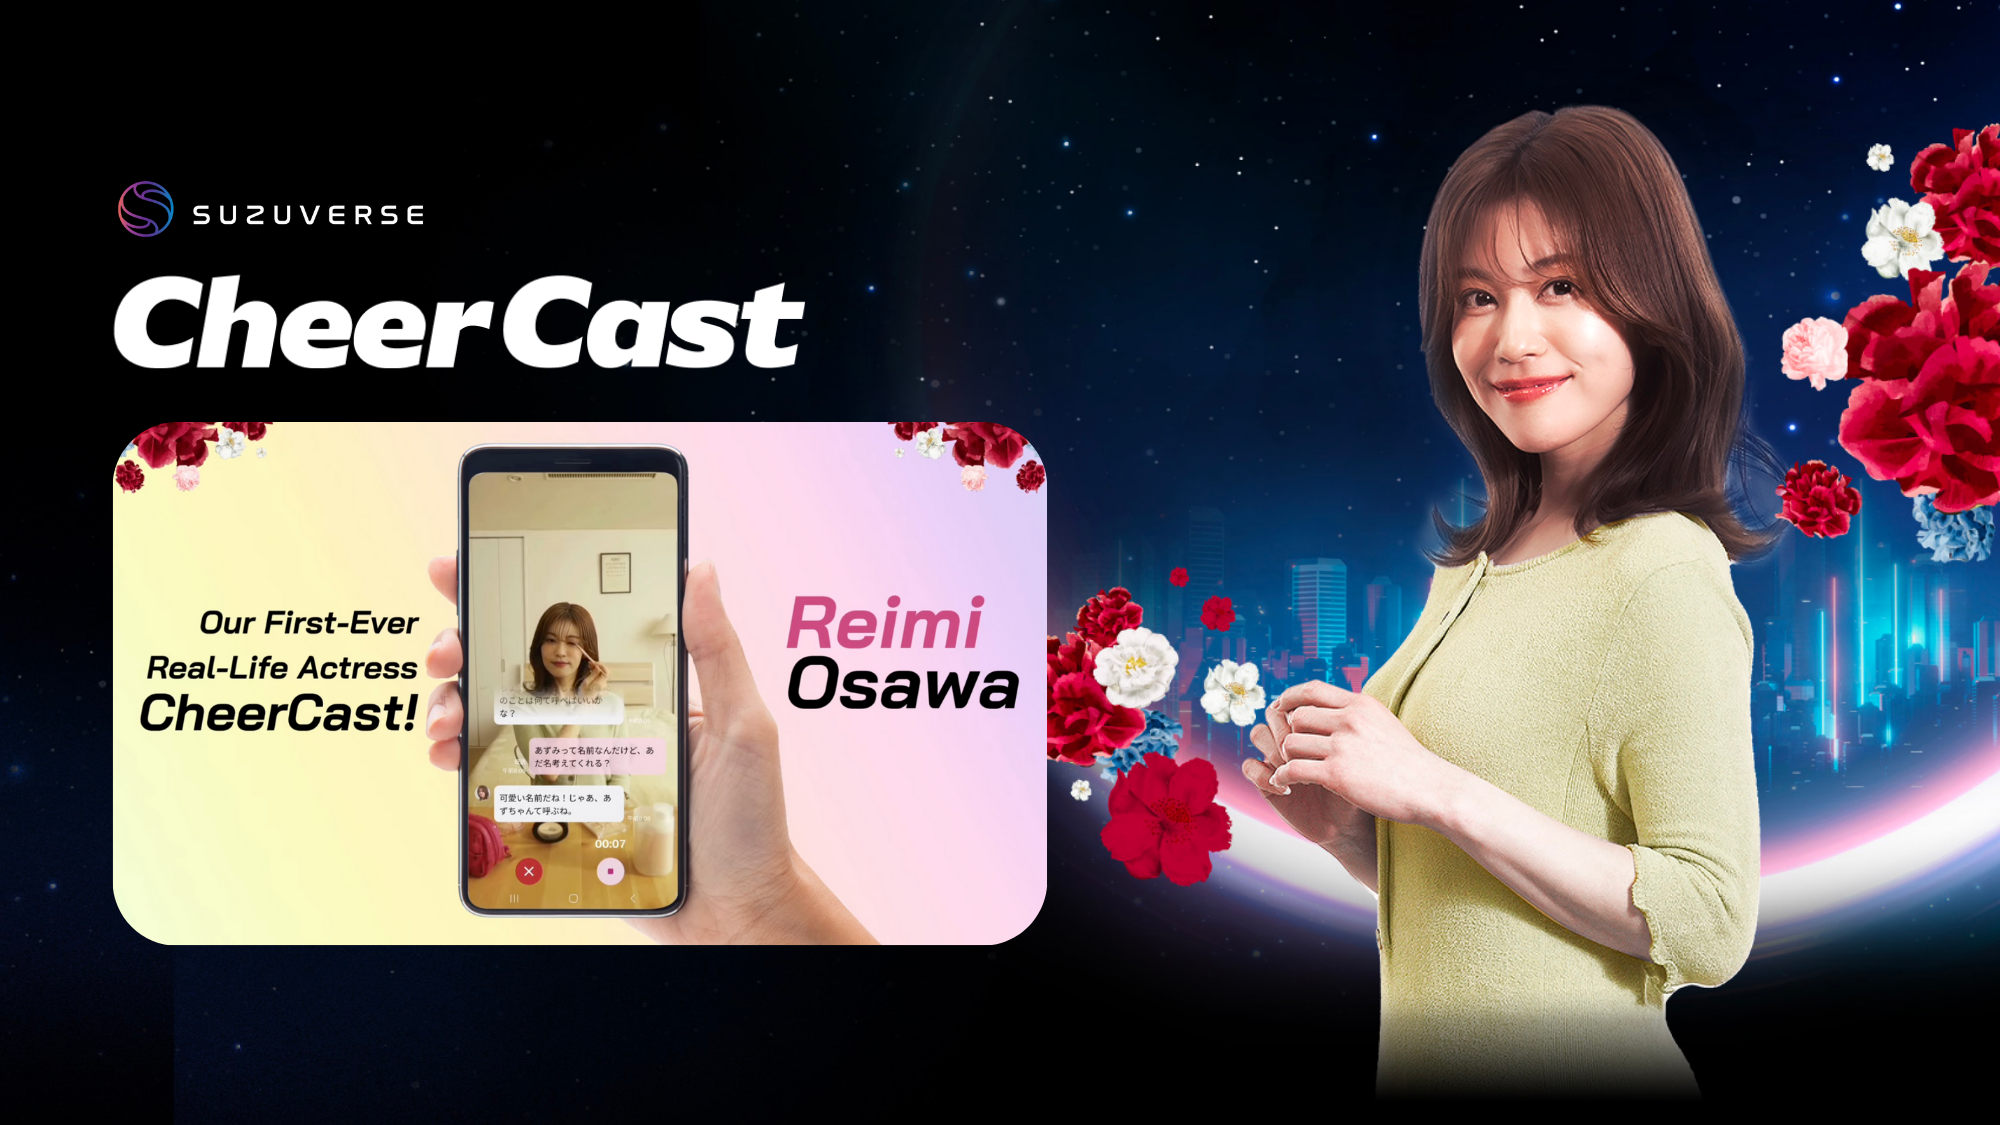 SUZUVERSE introduces Reimi Osawa as the first real-life actress to inspire a CheerCast avatar, blending celebrity charm with AI to combat loneliness in the metaverse.